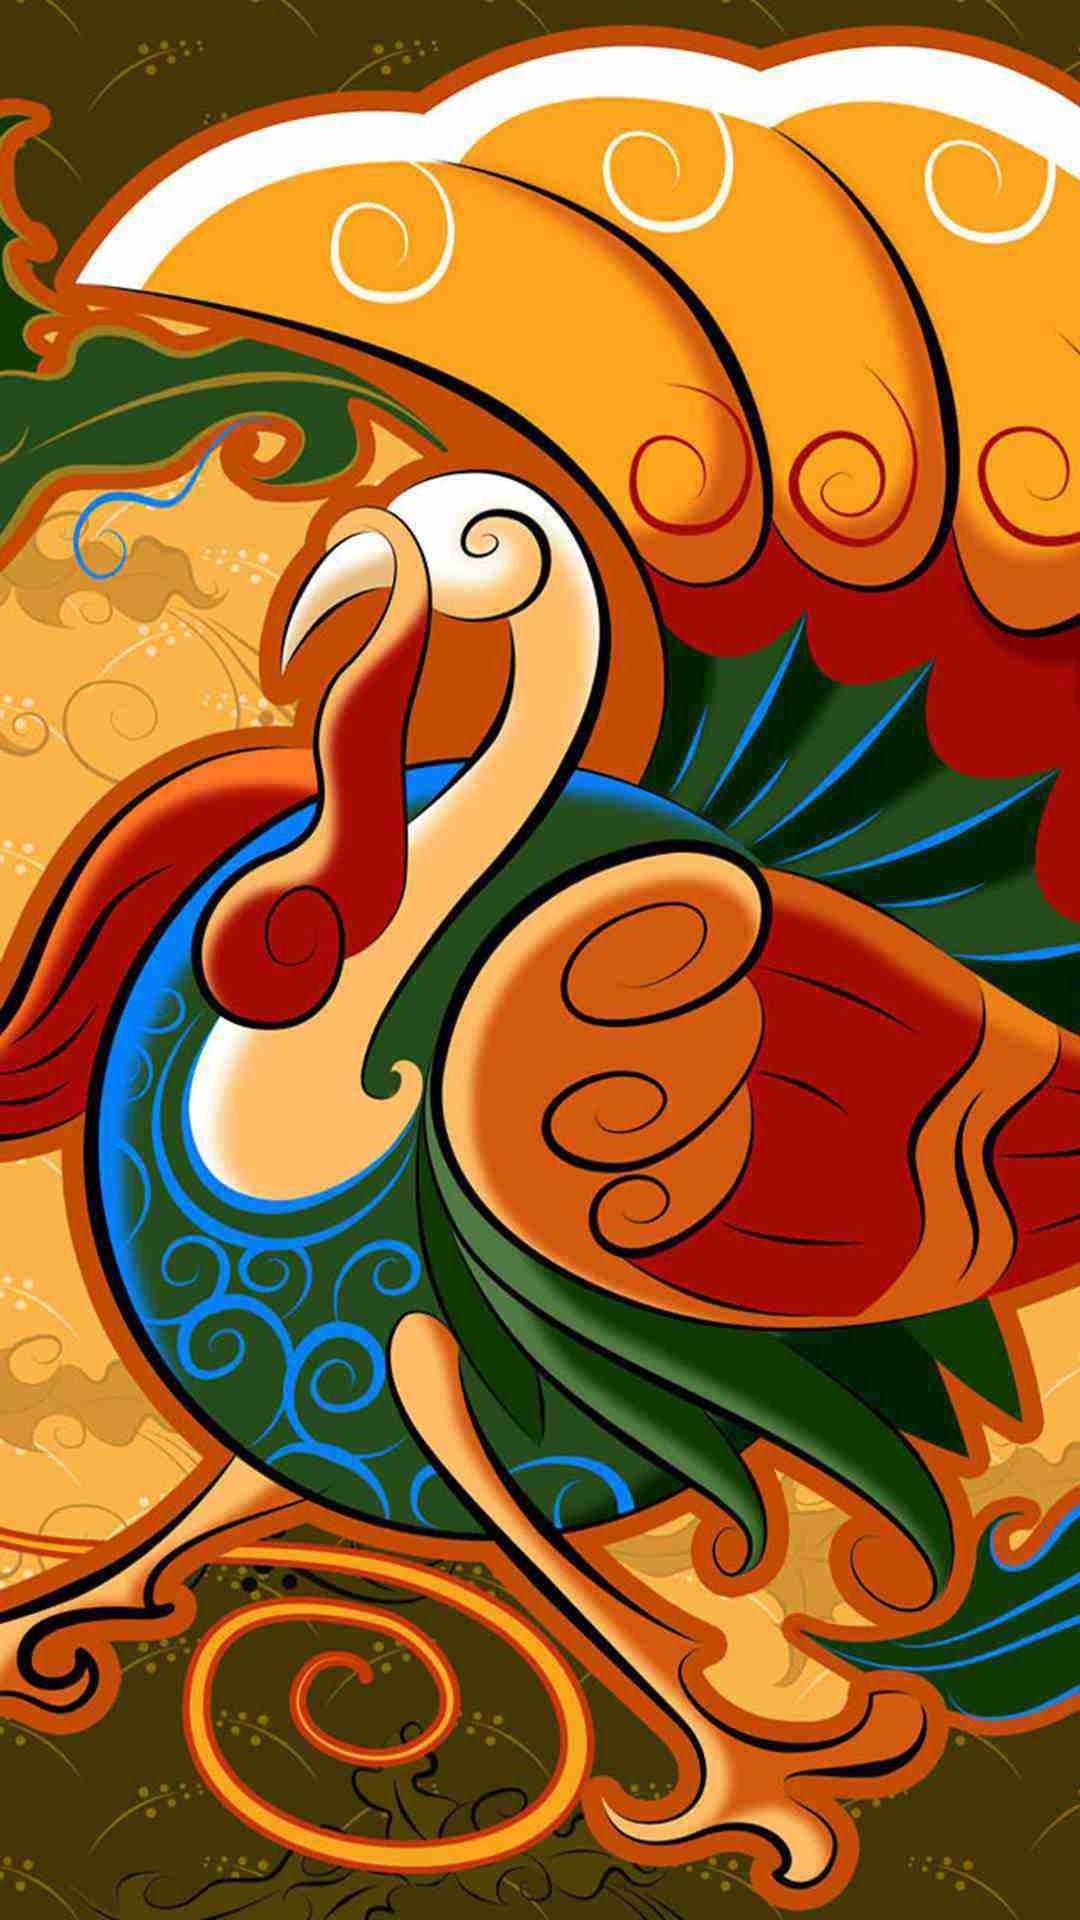 50 Best Free Thanksgiving Wallpaper Downloads For Your iPhone In 2022